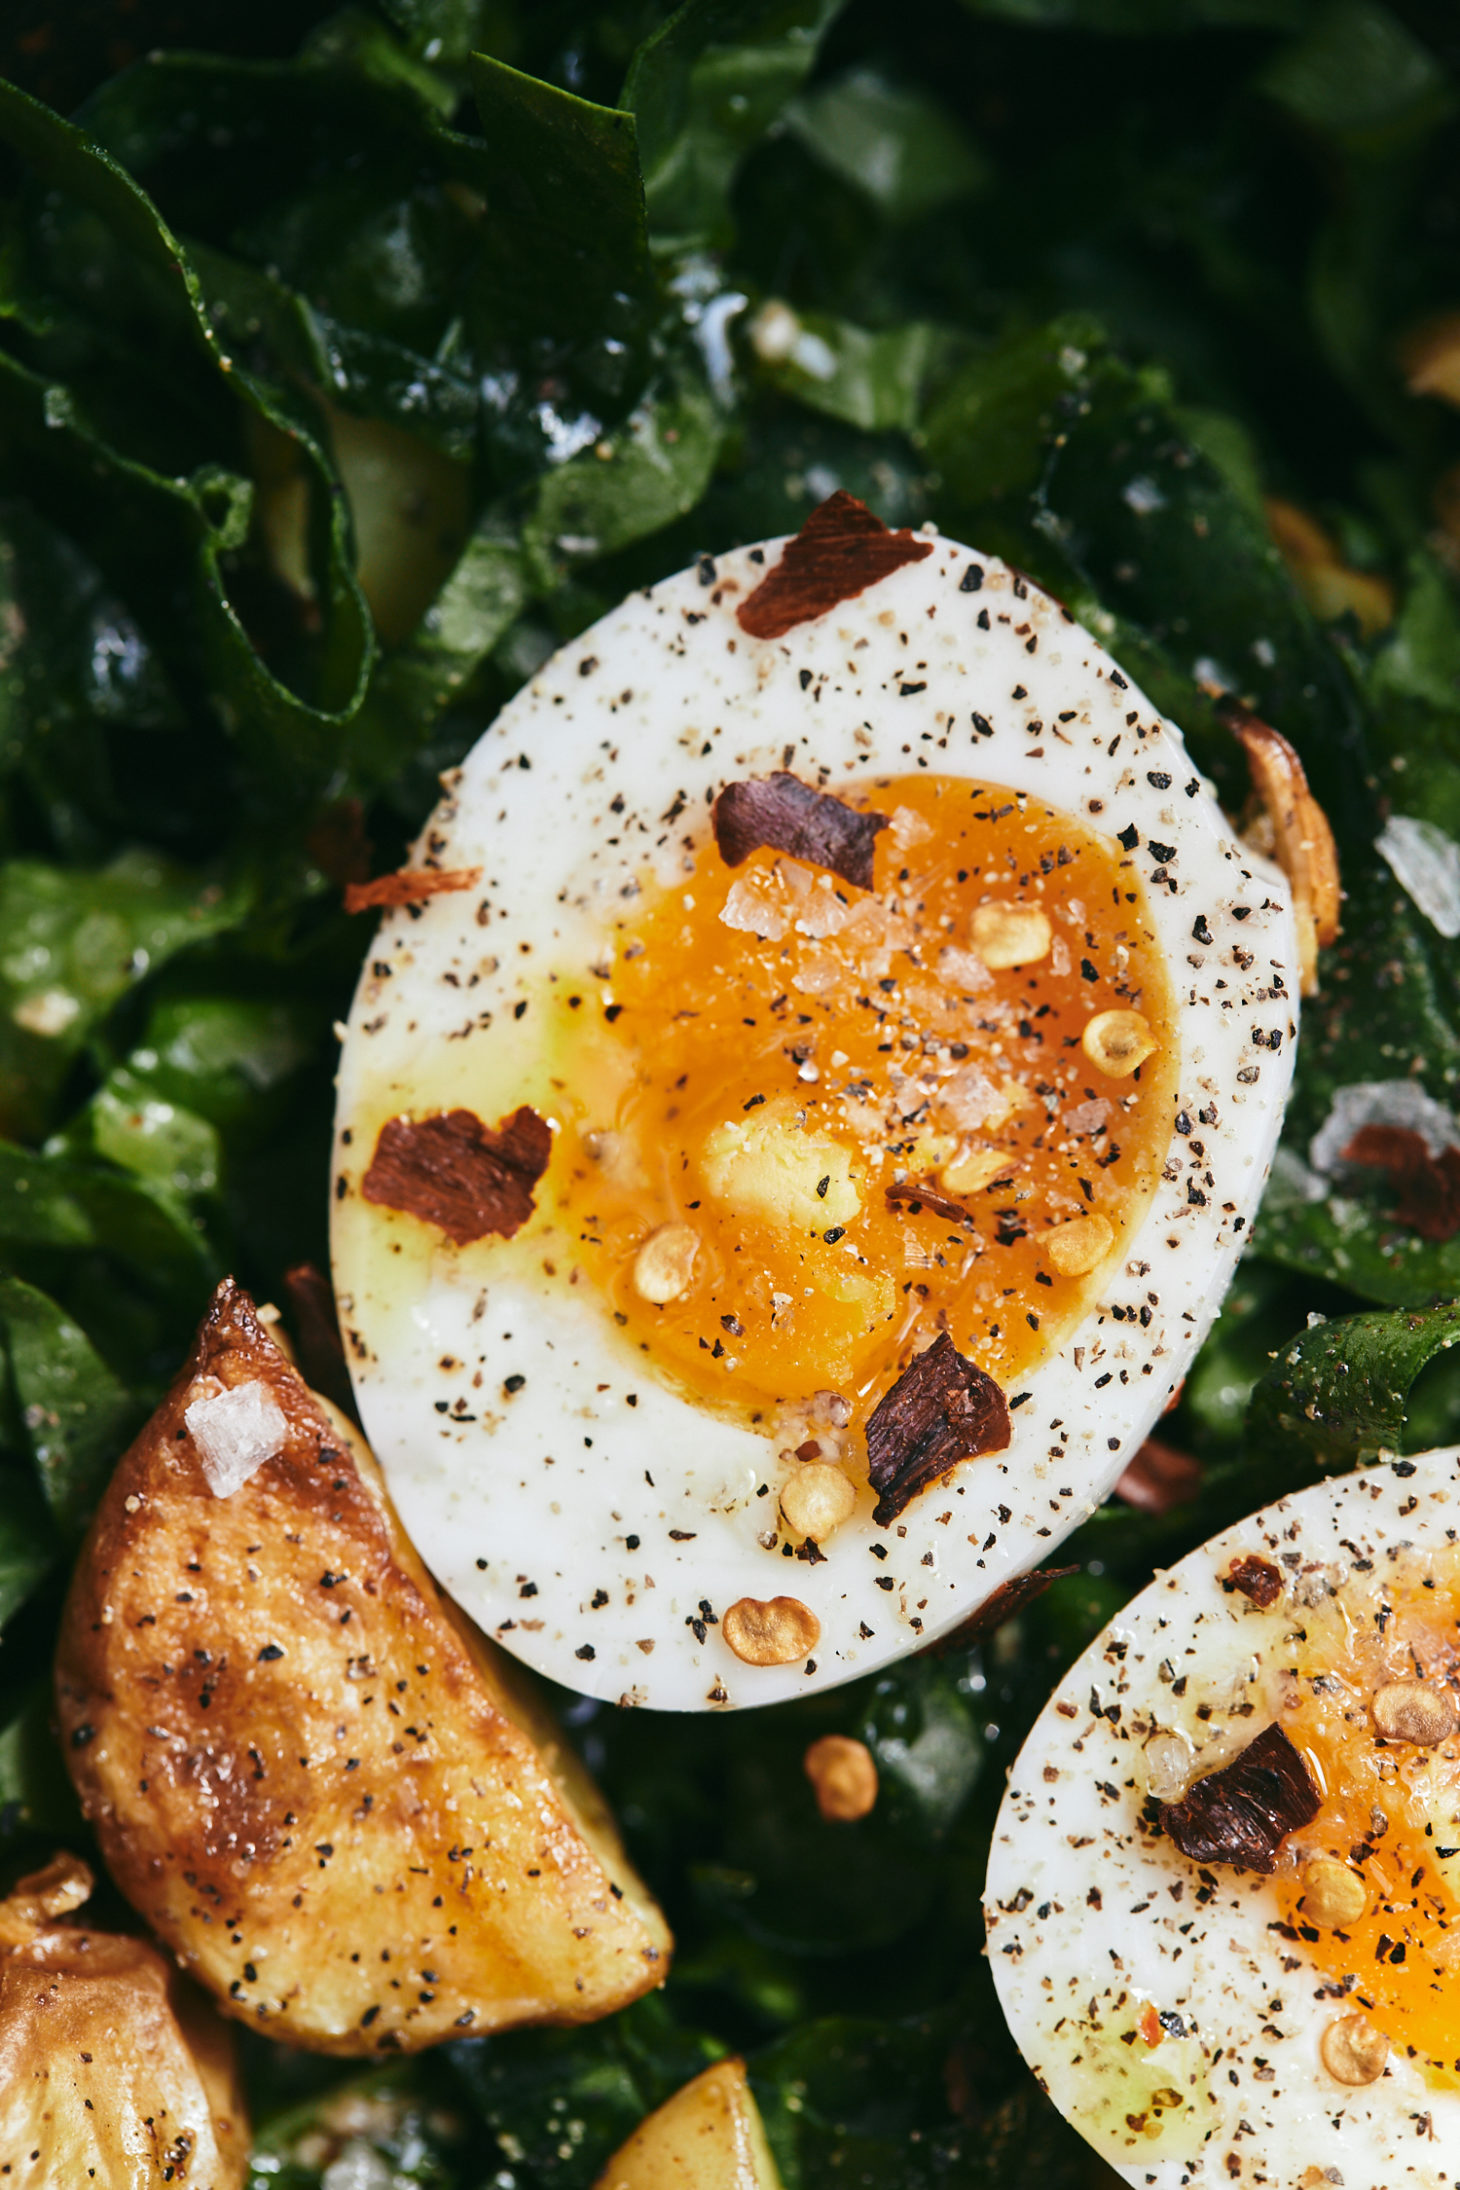 Garlic Roasted Potato and Spinach Salad with Eggs